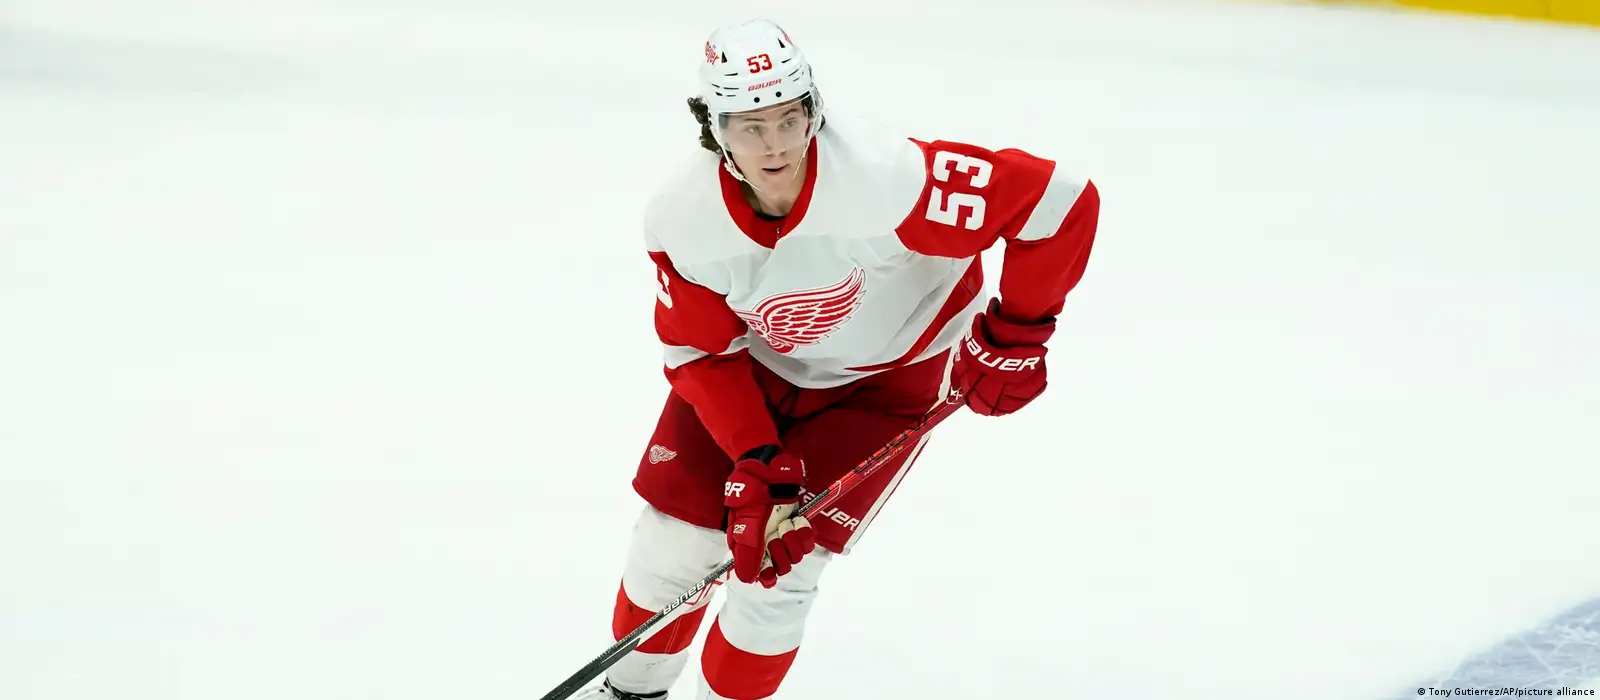 Seider claims Calder Trophy as NHL's top rookie